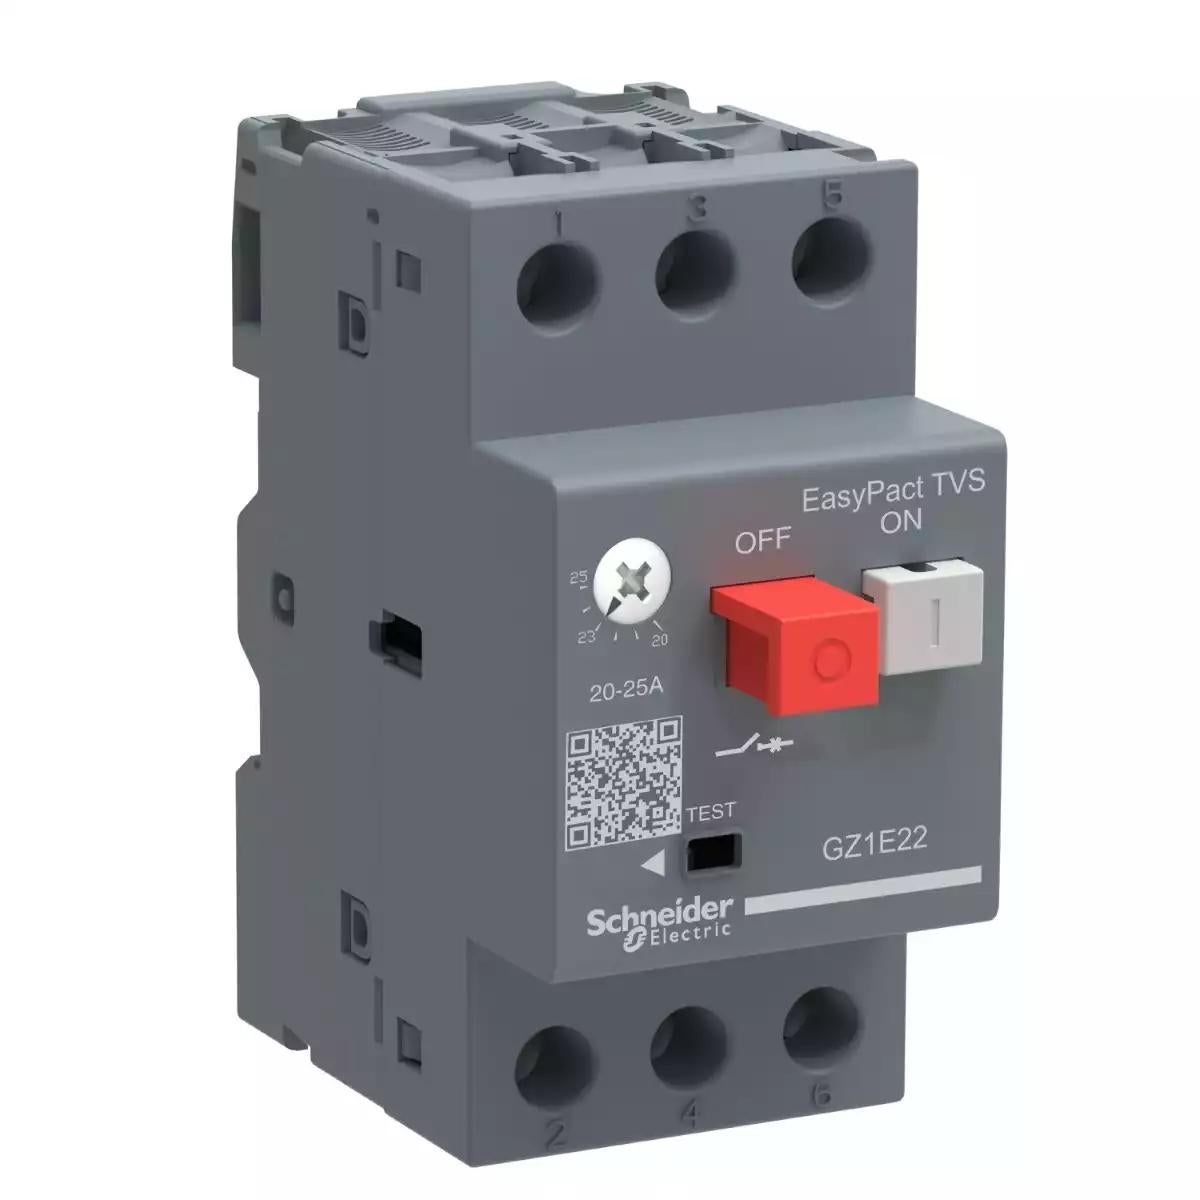 Motor circuit breaker, EasyPact, TVS GZ1E, AC-3, 3P, 0.63..1A, thermal magnetic detection